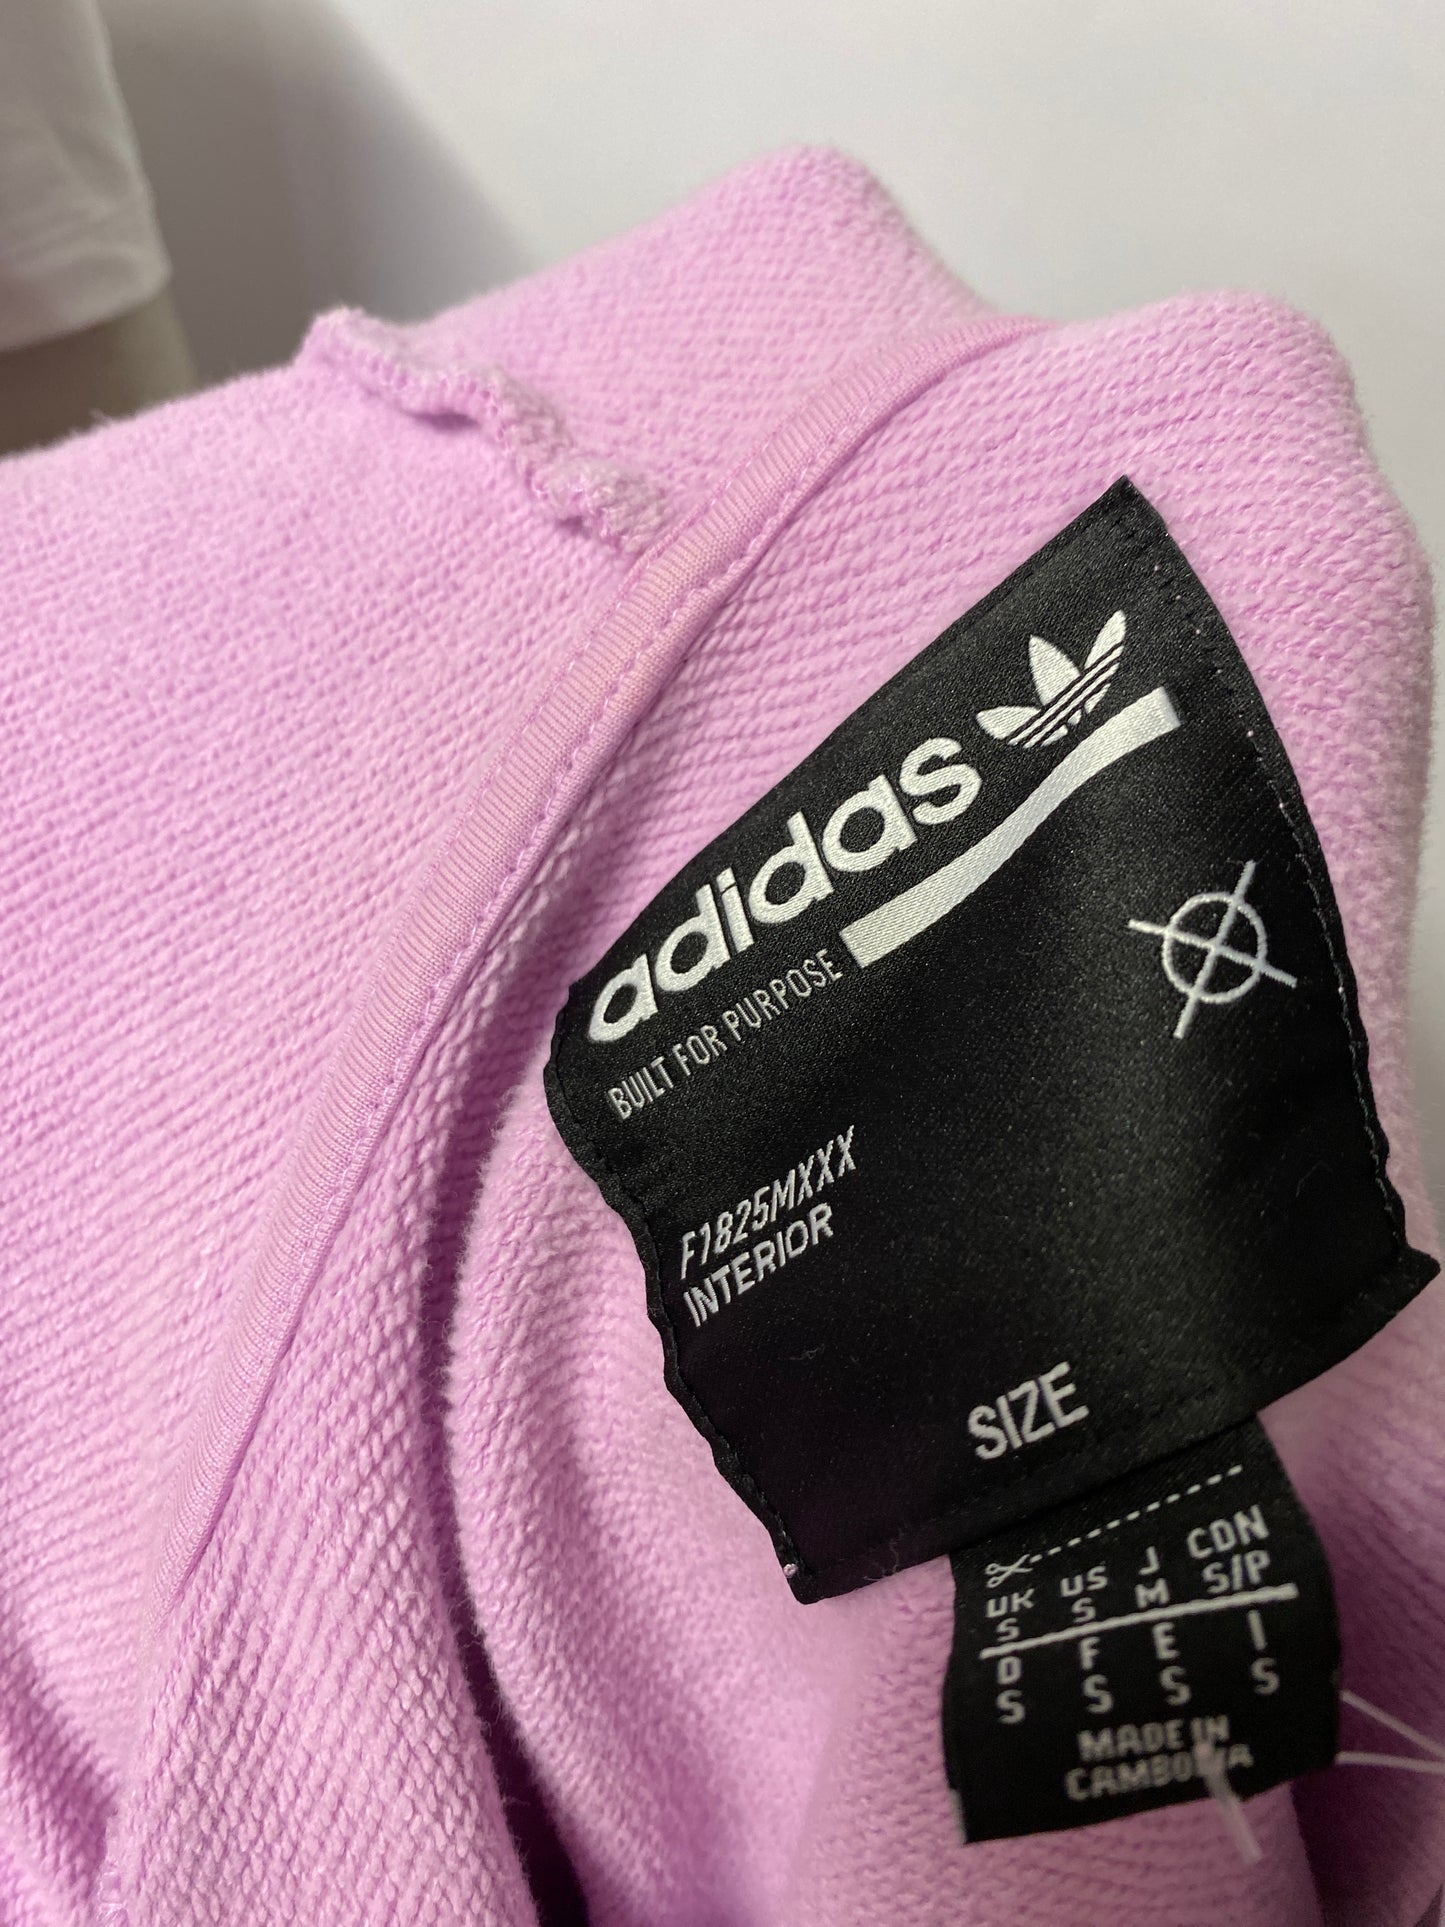 Adidas Unisex Kaval Lilac Zip Up Cotton Hoodie Small